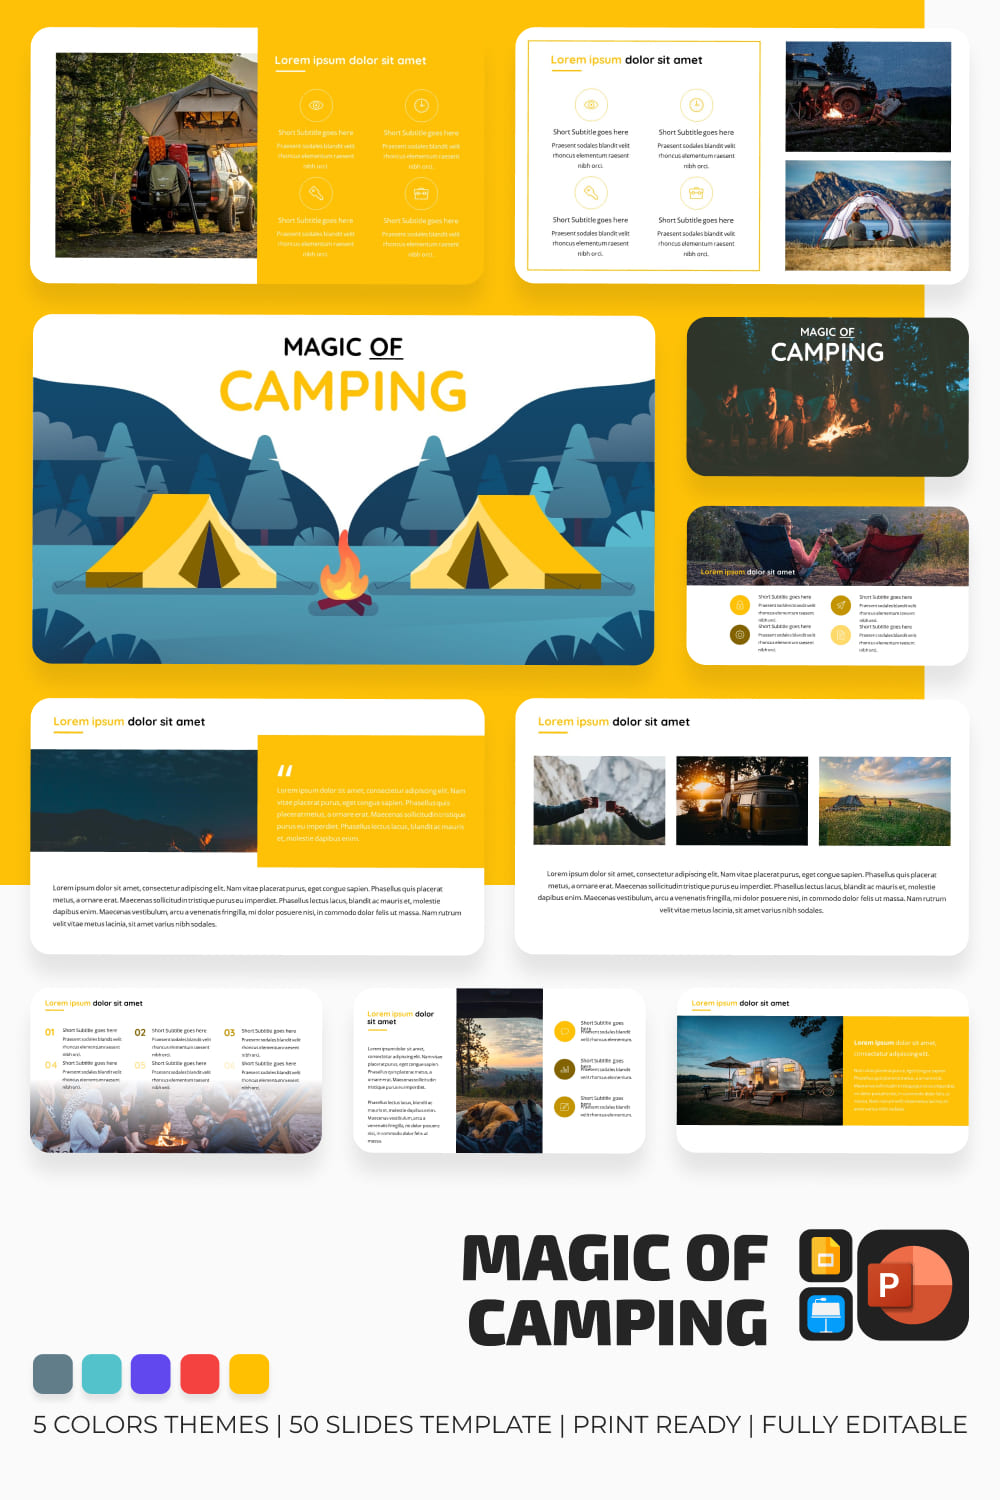 Camping travel presentation template.